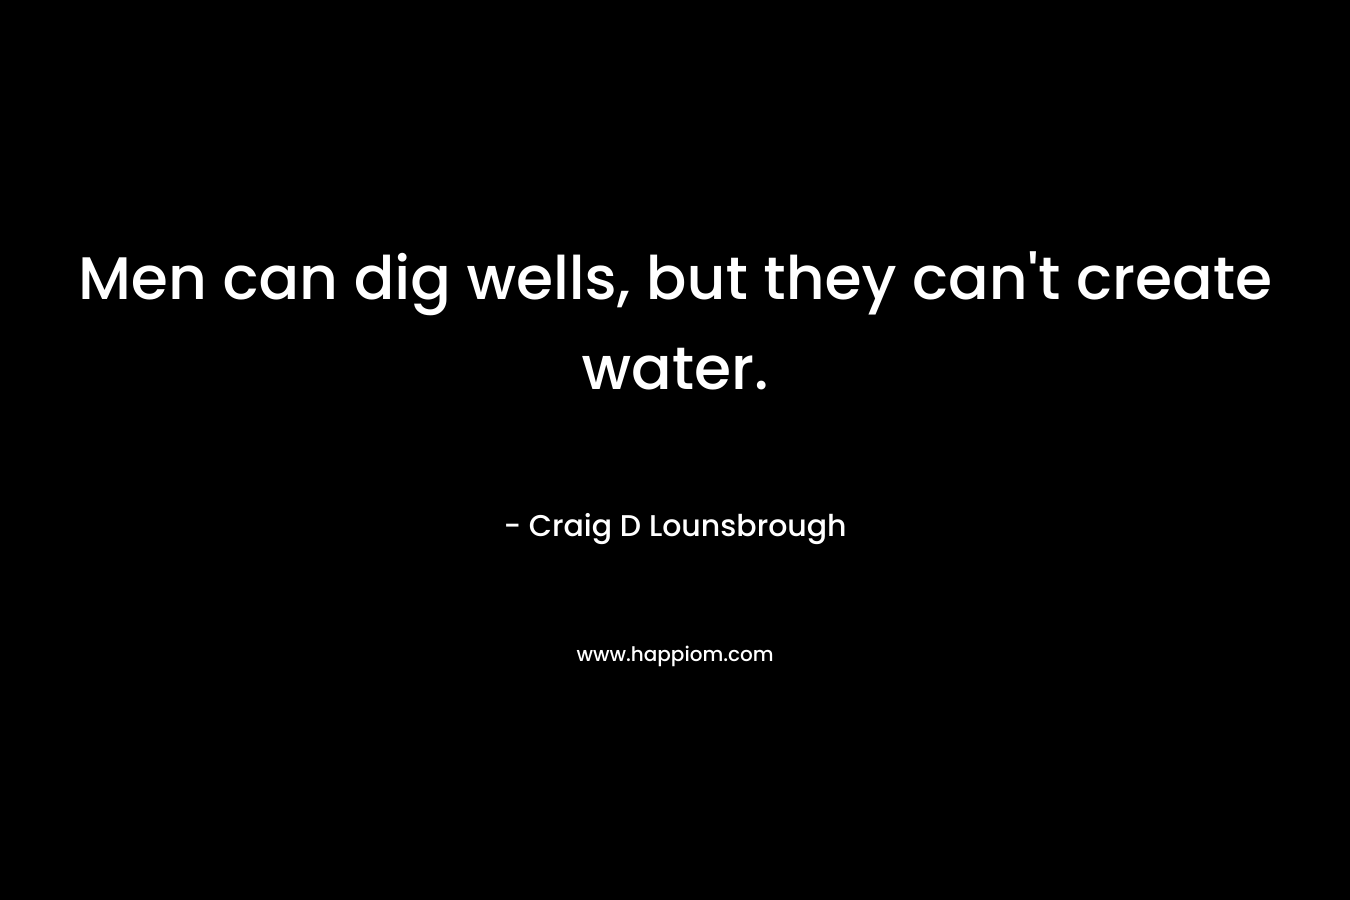 Men can dig wells, but they can't create water.